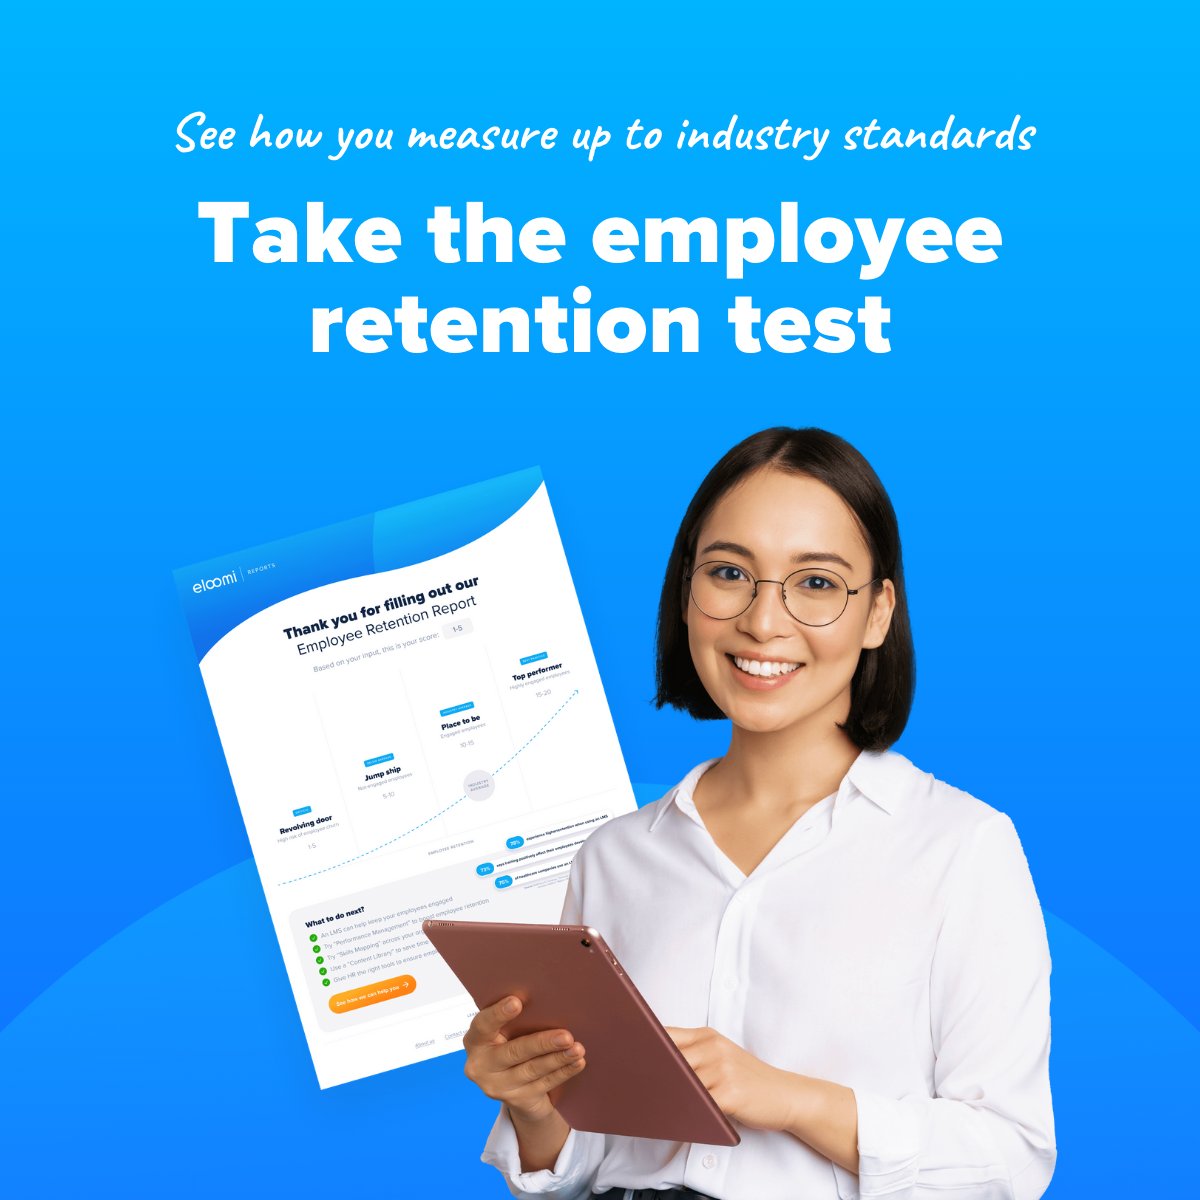 What's your employee retention strategy? Take the Employee Retention Self-Assessment to see how you measure up against industry standards. 📊 

Assess your retention efforts now👇
ow.ly/ZpaV50RFwKK

#EmployeeRetention #CompanyCulture #HRStrategy